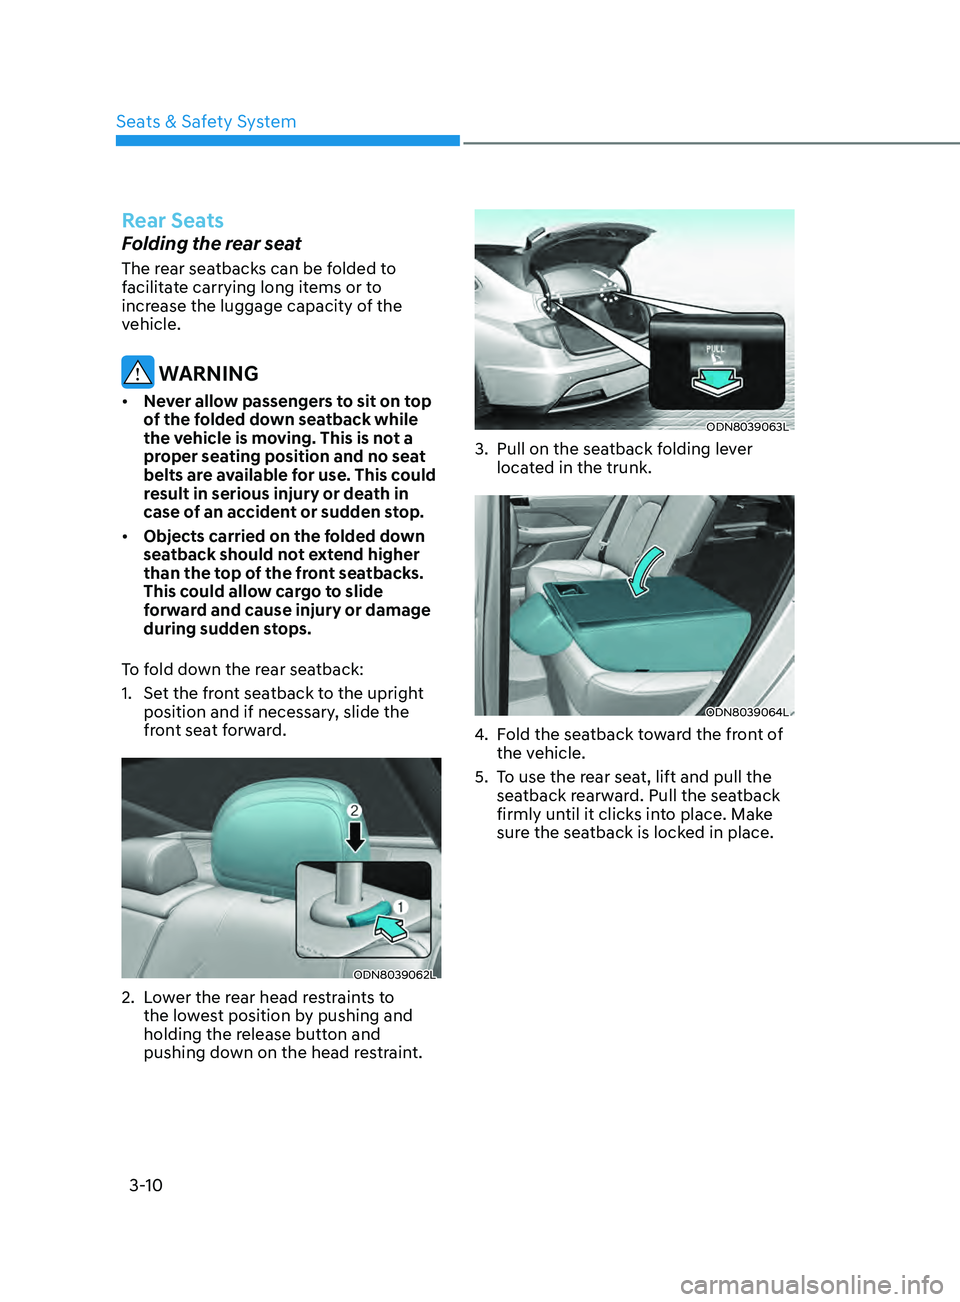 HYUNDAI SONATA LIMITED 2021 Owners Guide 3-10
Rear Seats
Folding the rear seat
The rear seatbacks can be folded to 
facilitate carrying long items or to 
increase the luggage capacity of the 
vehicle.
 WARNING
•	Never allow passengers to s